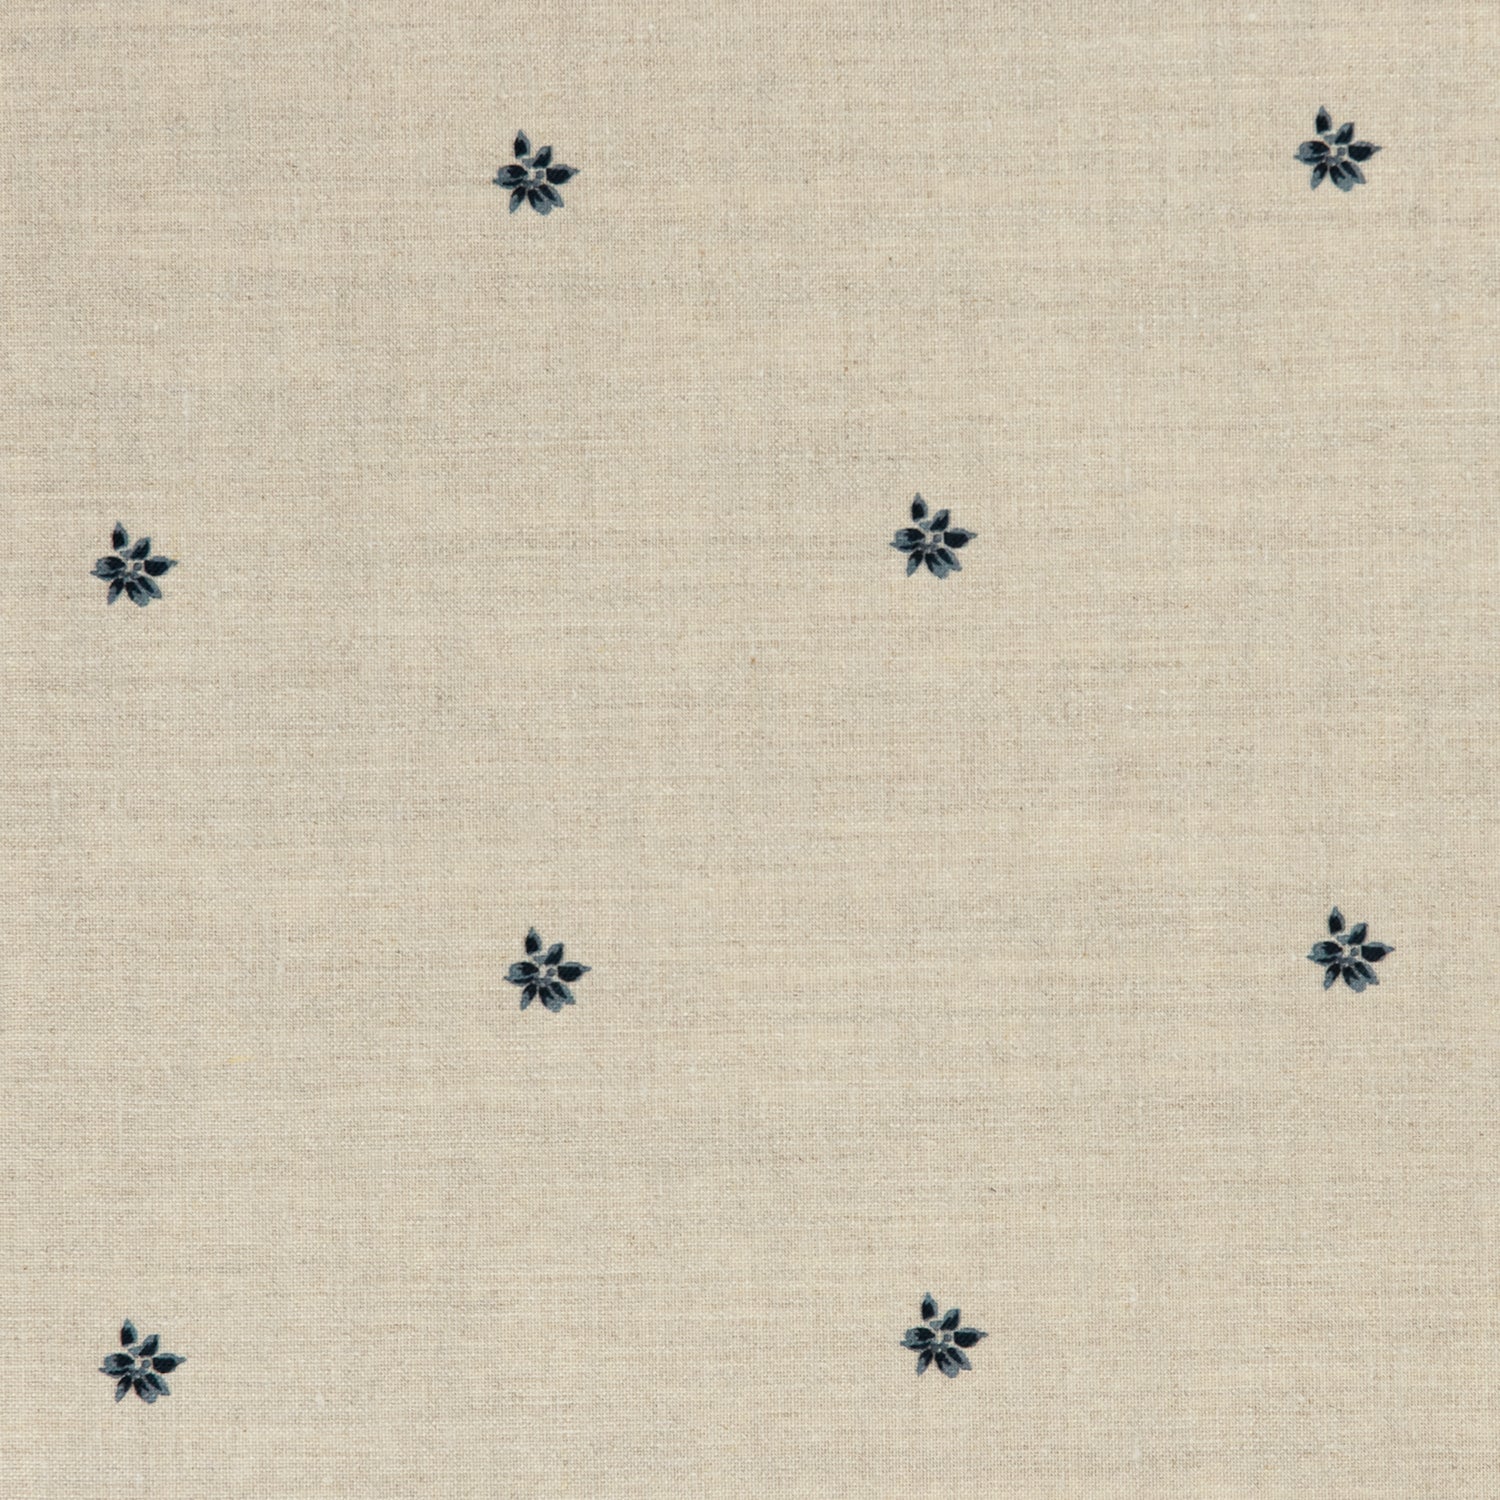 Detail of a printed linen fabric in a repeating small-scale flower pattern in navy on a cream field.